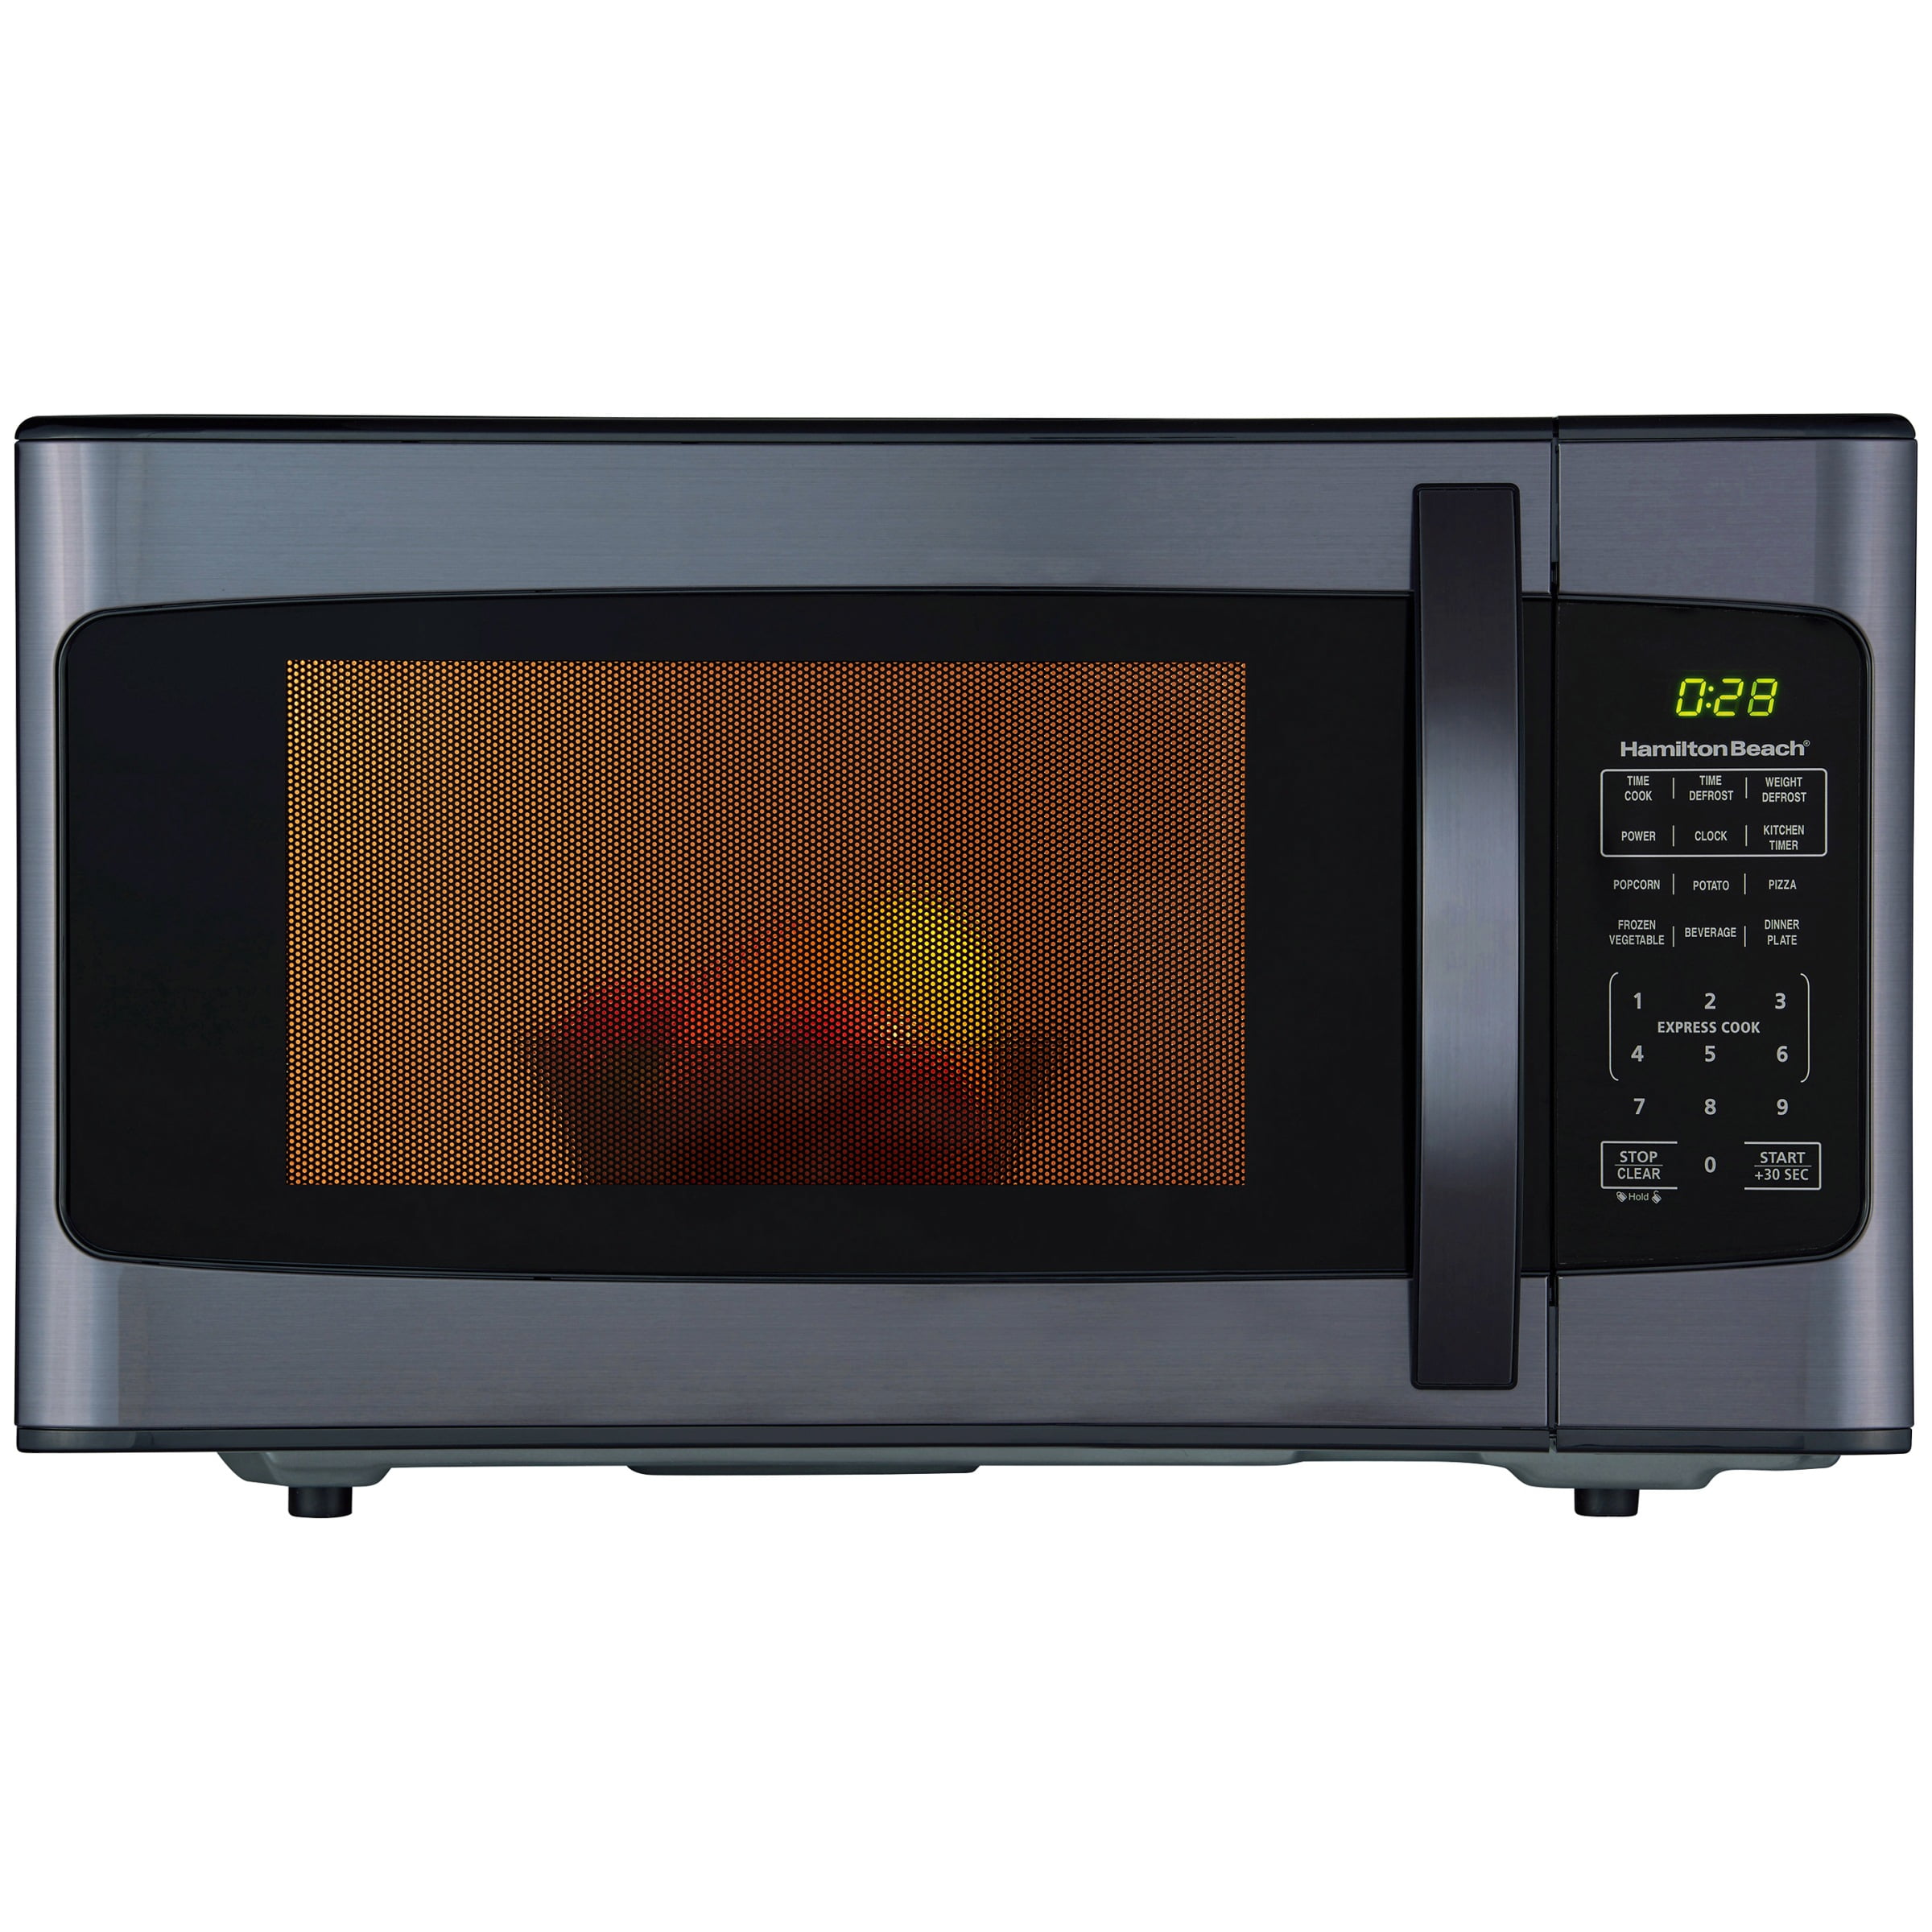 BLACK+DECKER 1.1 Cu. Ft. Microwave Stainless Steel Countertop Microwave Oven  EM031MGGX2 - The Home Depot